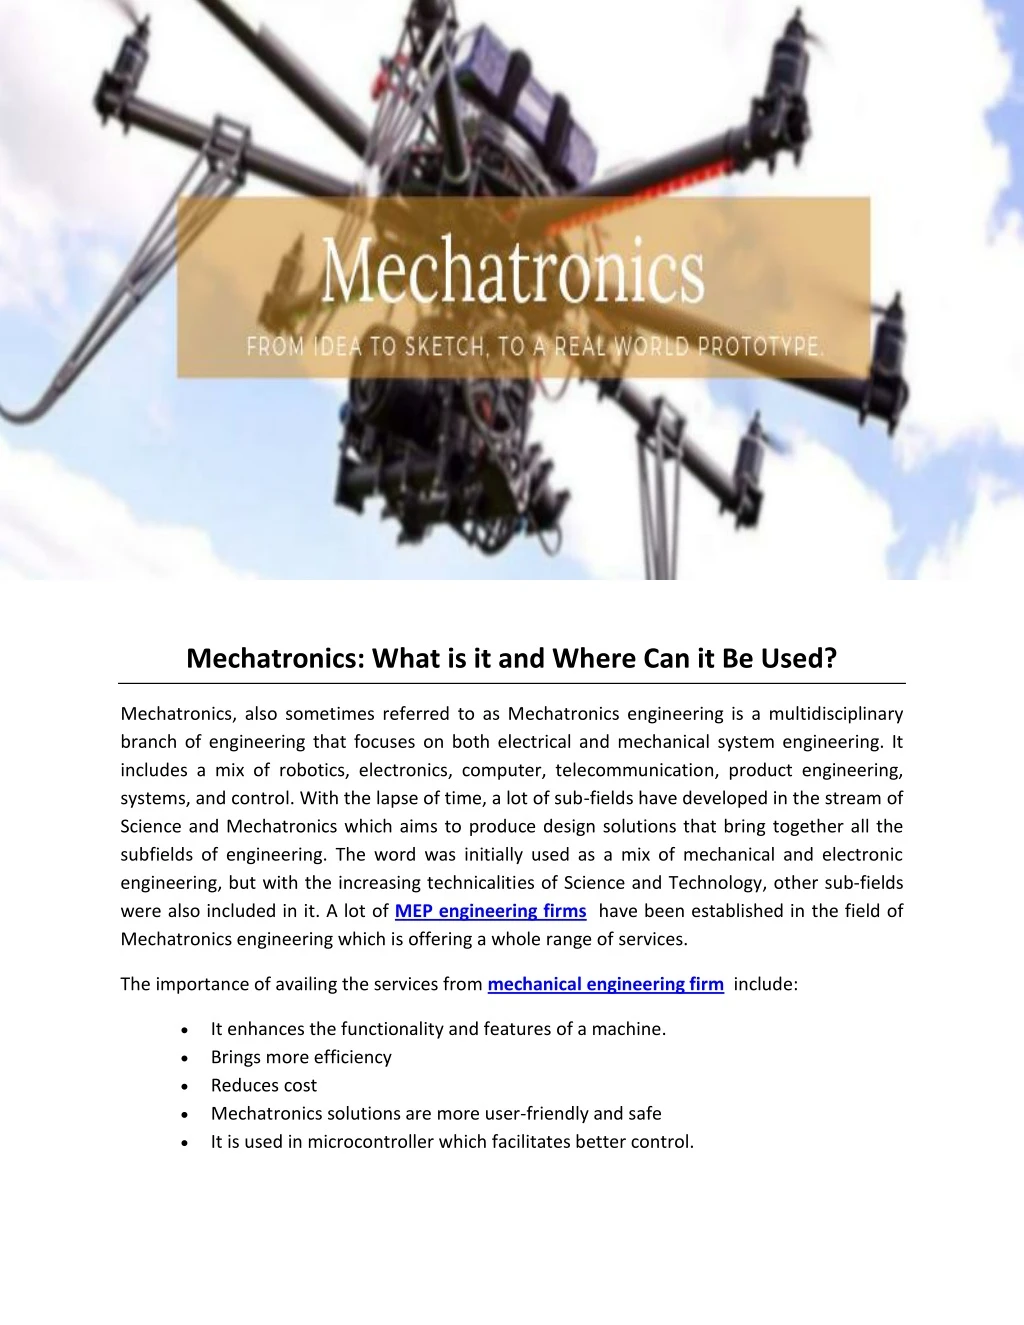 mechatronics what is it and where can it be used